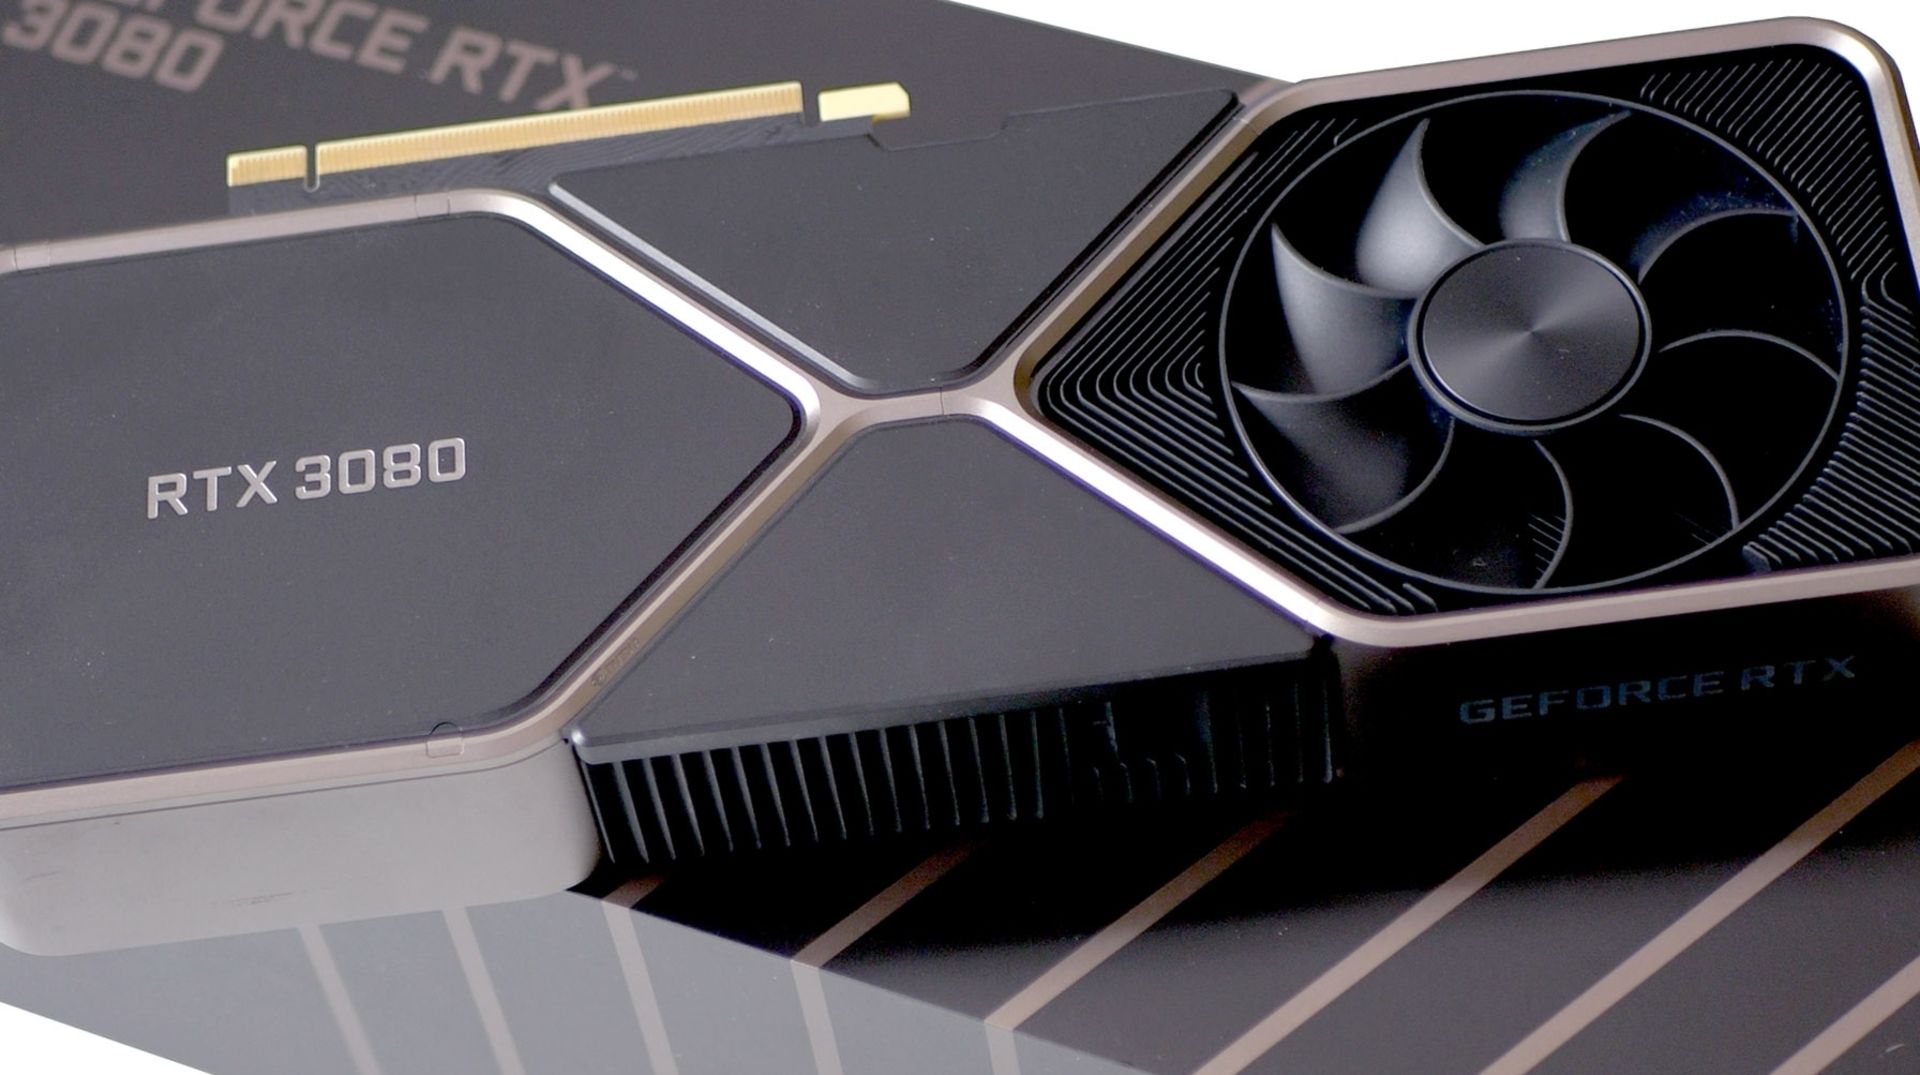 Nvidia RTX 3000s: Scalping Your Lead Off!